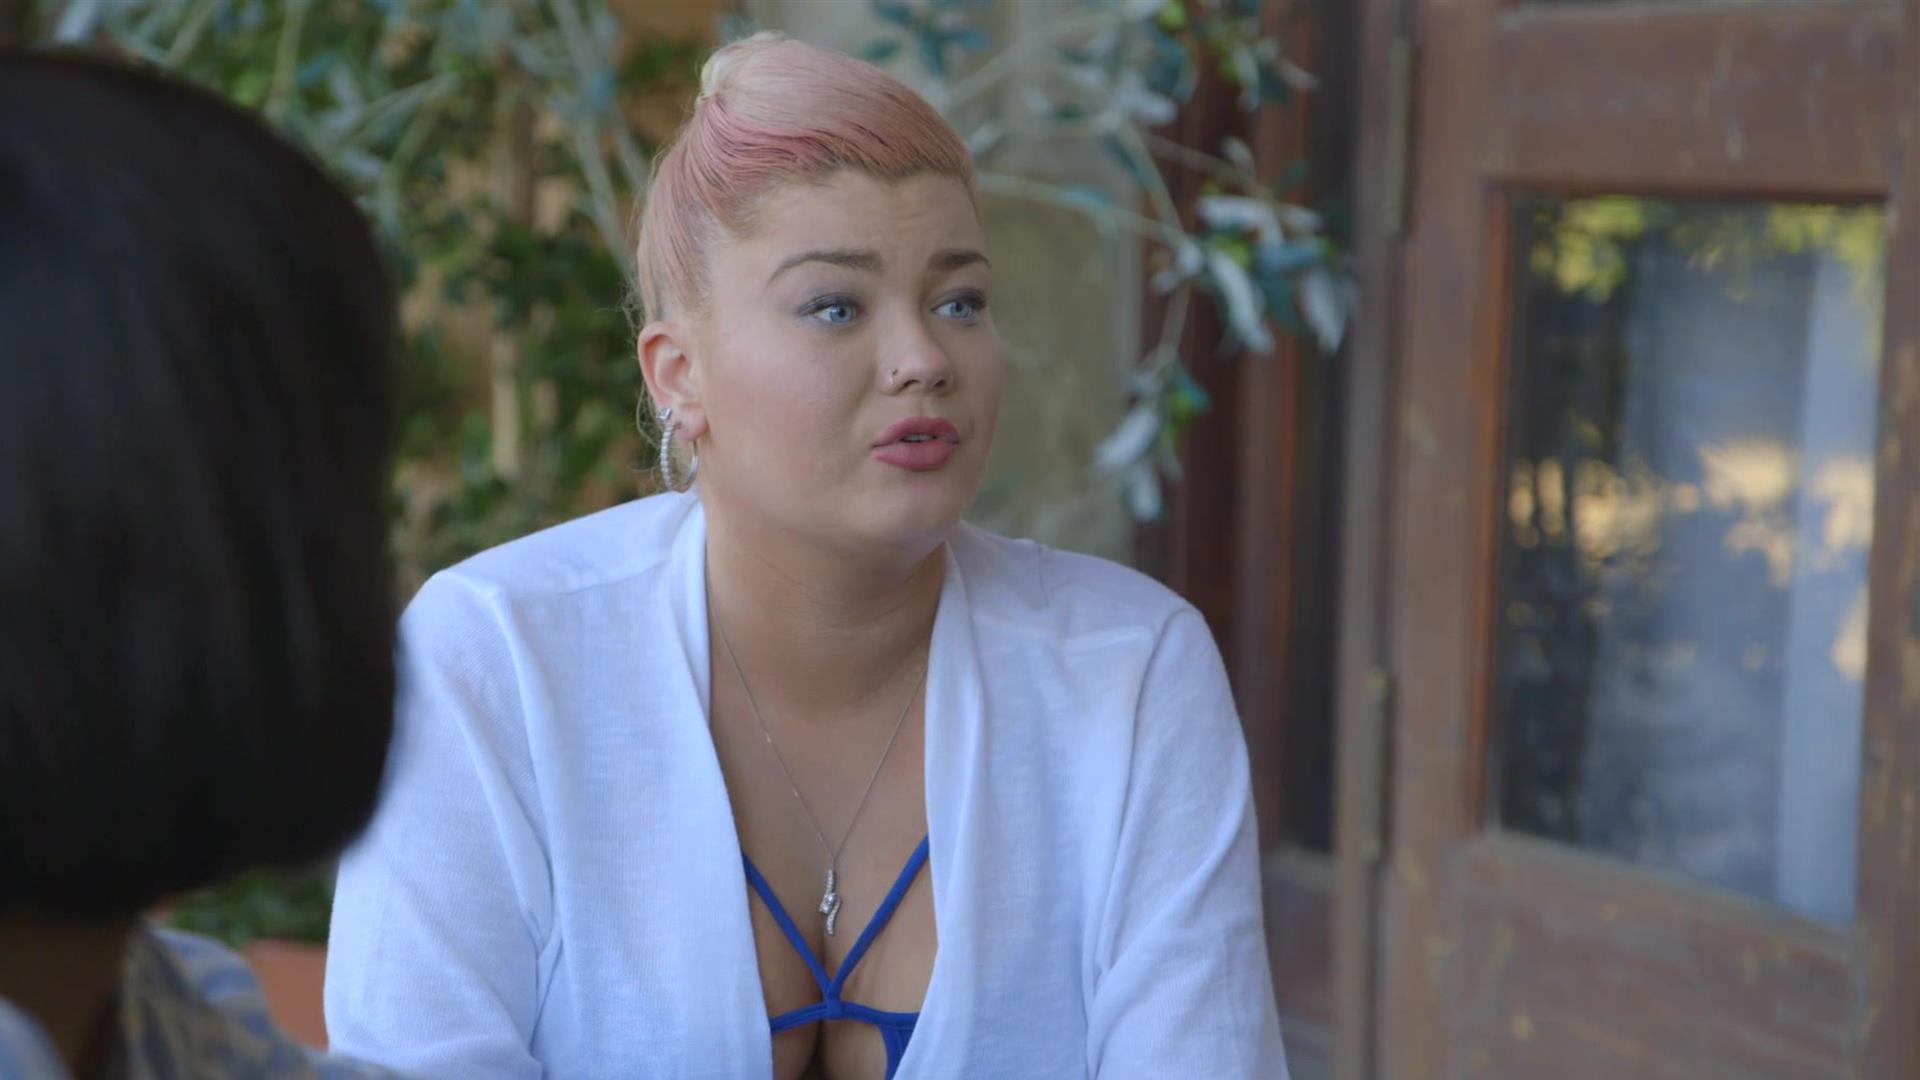 It's Decision Time for Amber! Will She Stay or Go?